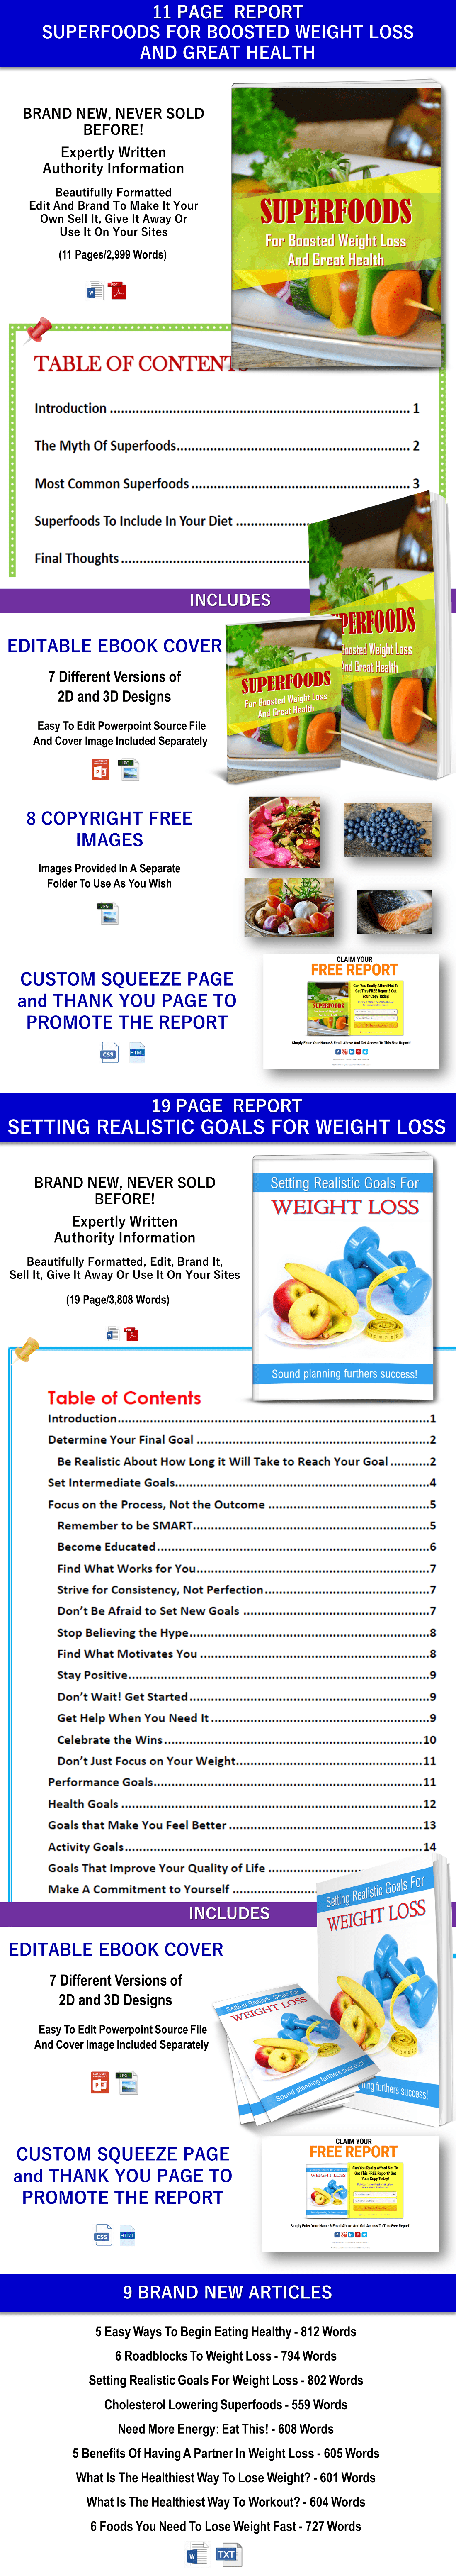 Superfoods and Weight Loss Goals PLR